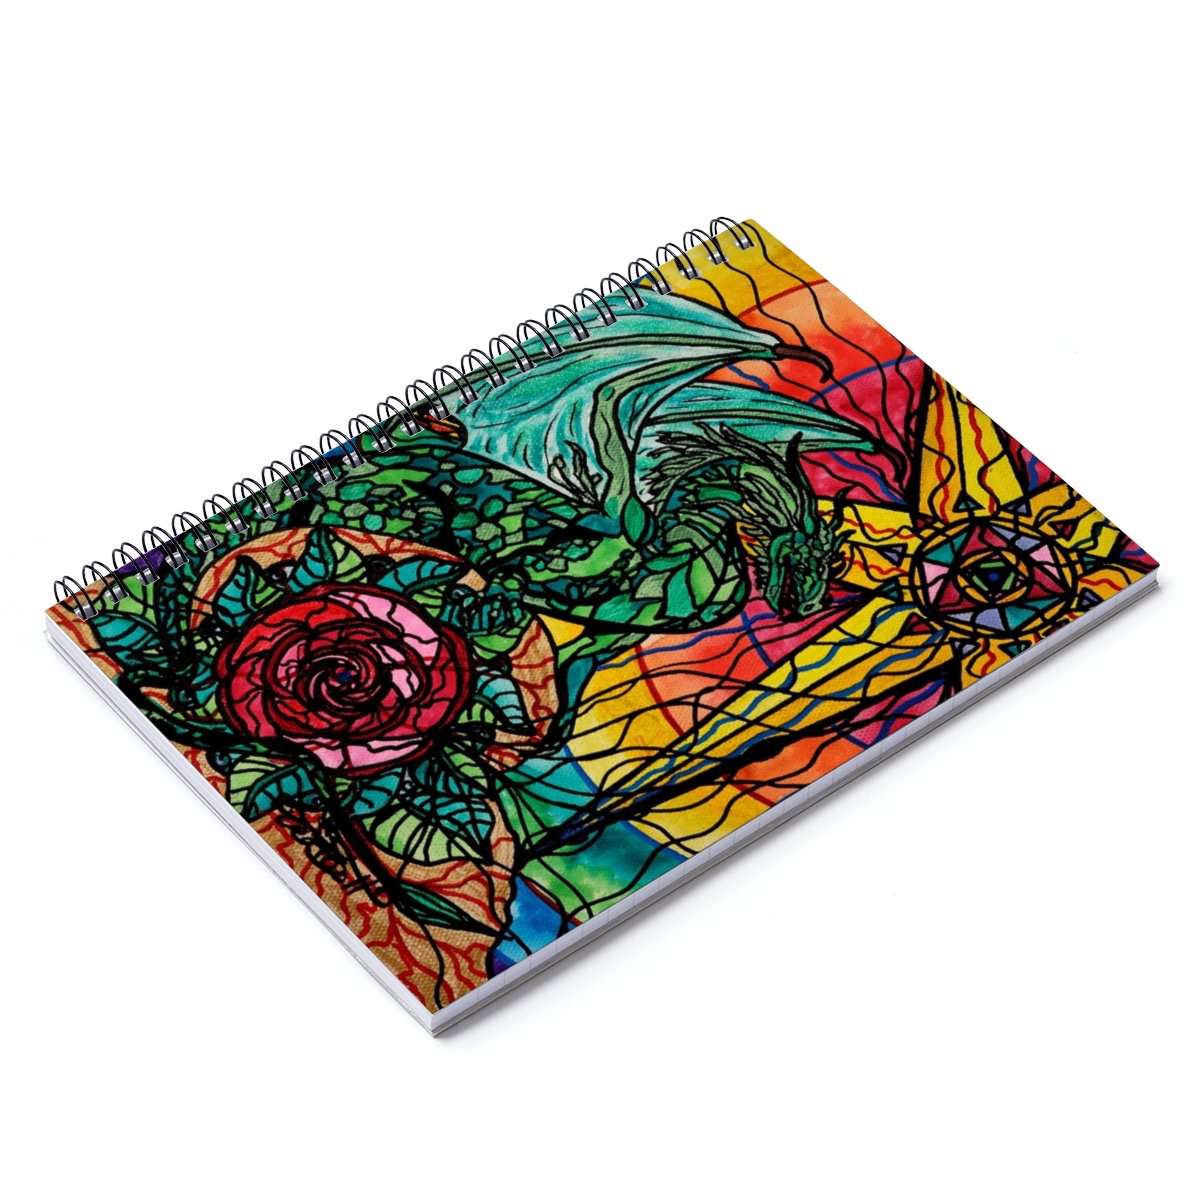 the-official-site-for-authentic-dragon-spiral-notebook-online_1.jpg